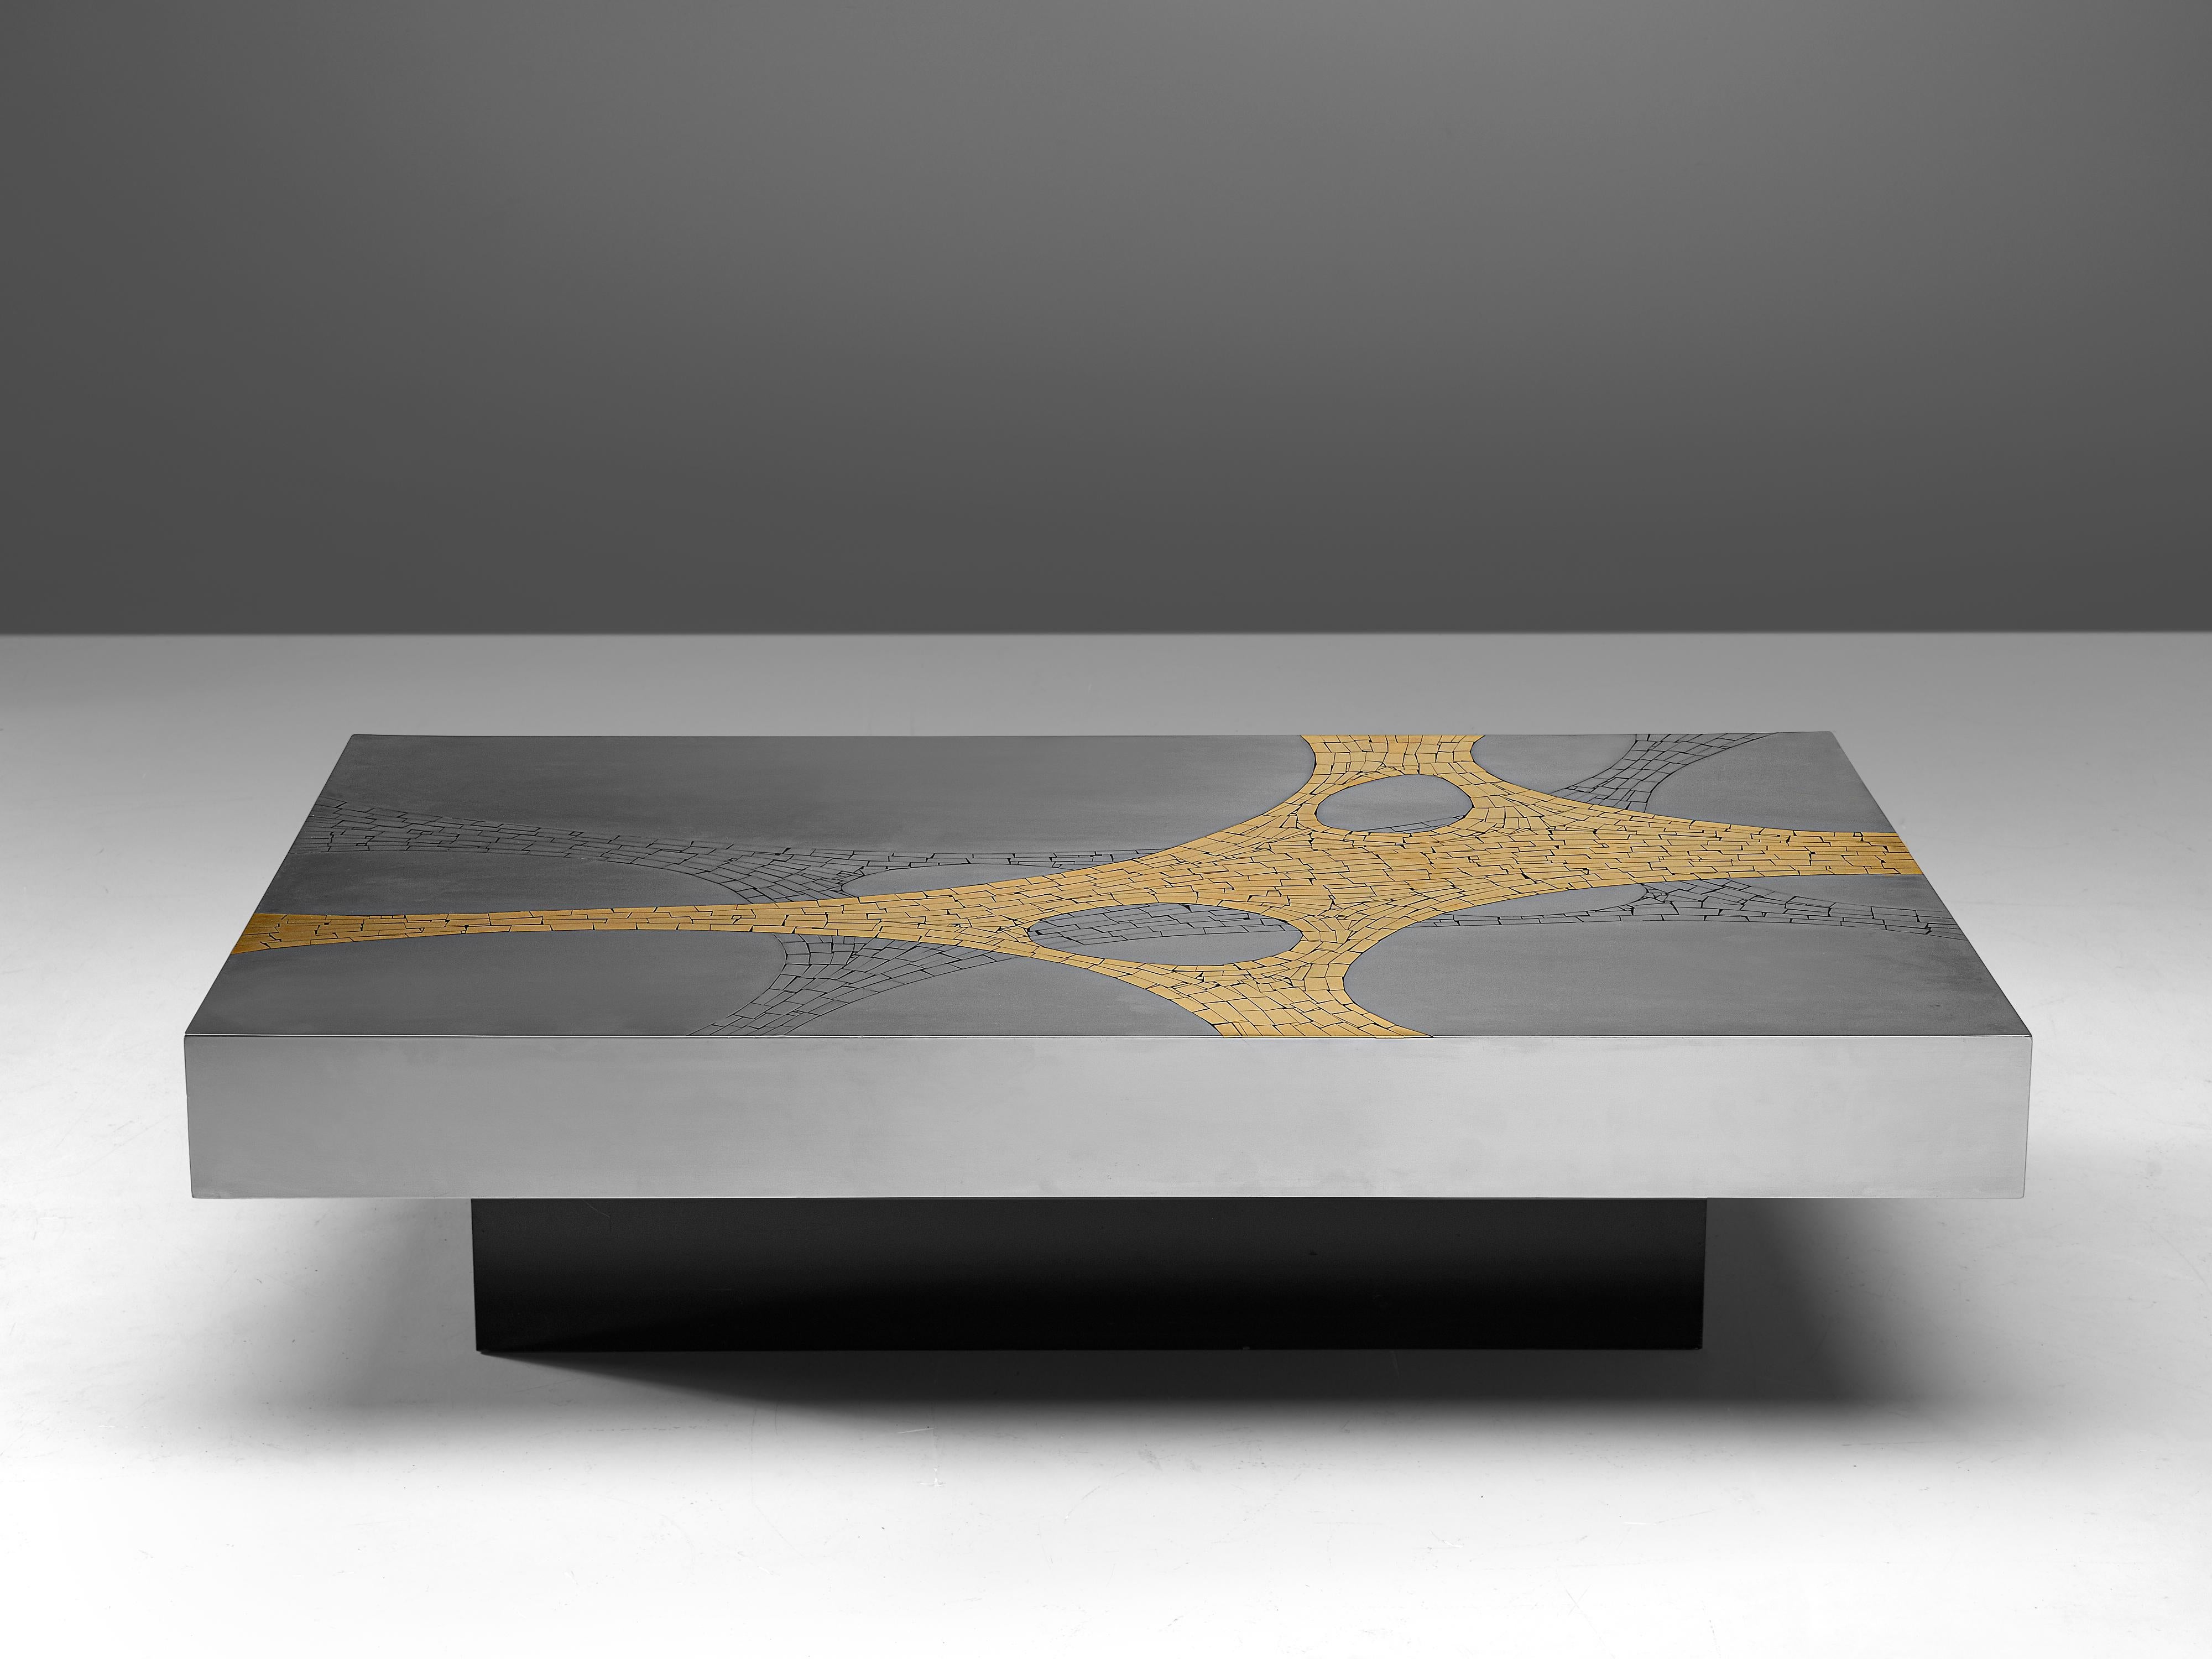 Jean Claude Dresse, coffee table, brushed stainless steel and brass, Belgium, circa 1970

An extraordinary piece, crafted with great eye for proportions and detail, typical for the work of Dresse. The combination of materials, steel, brass have a